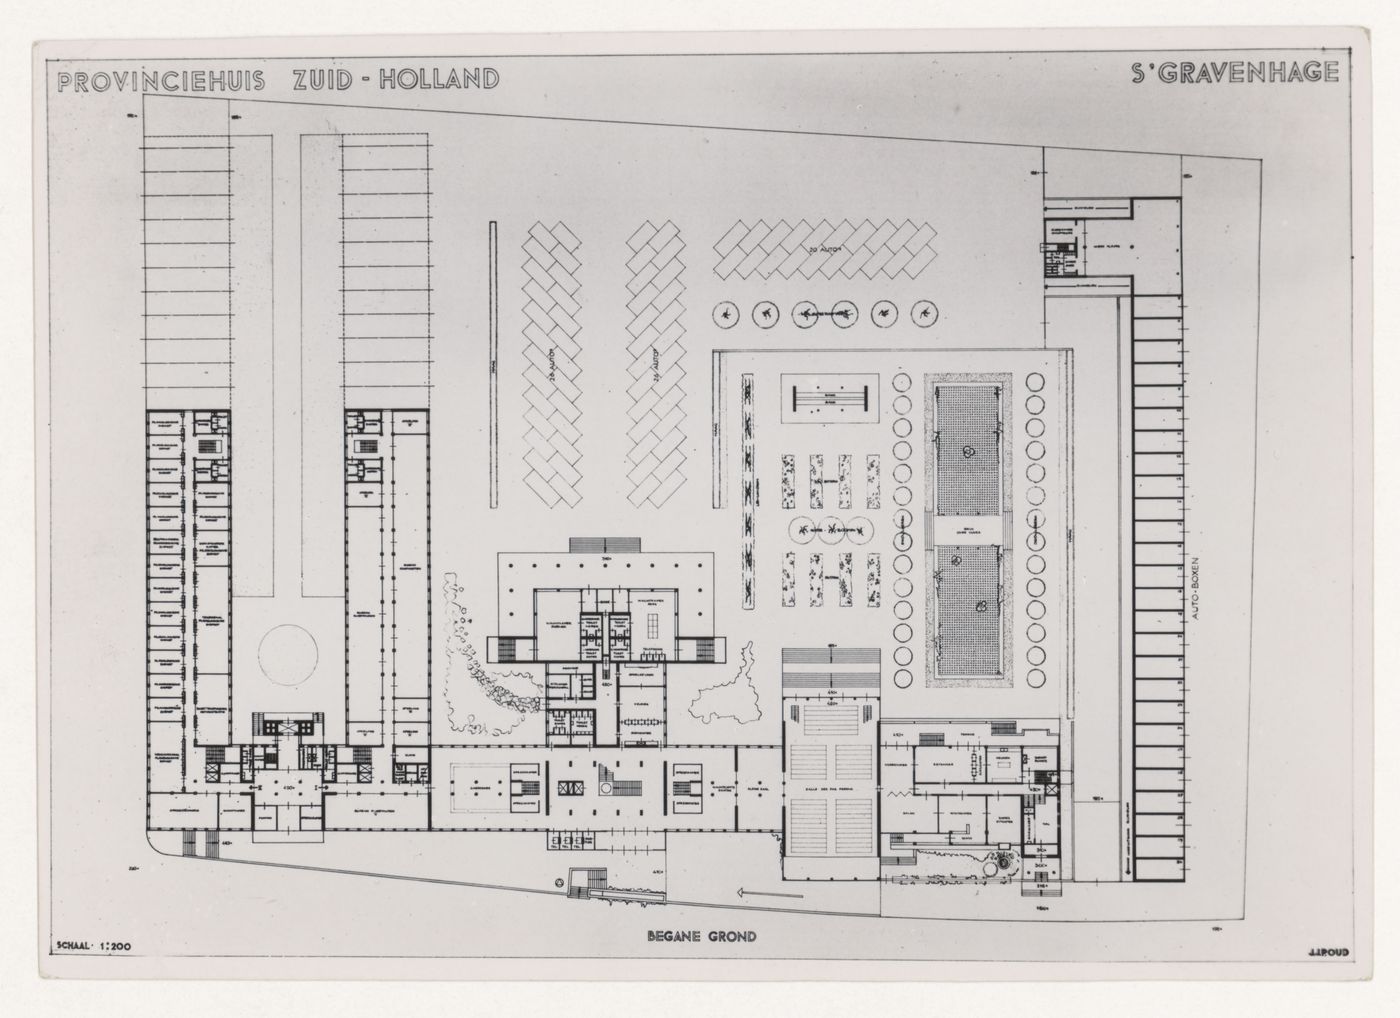 Photograph of a ground plan for the South Holland Local Government Headquarters, The Hague, Netherlands